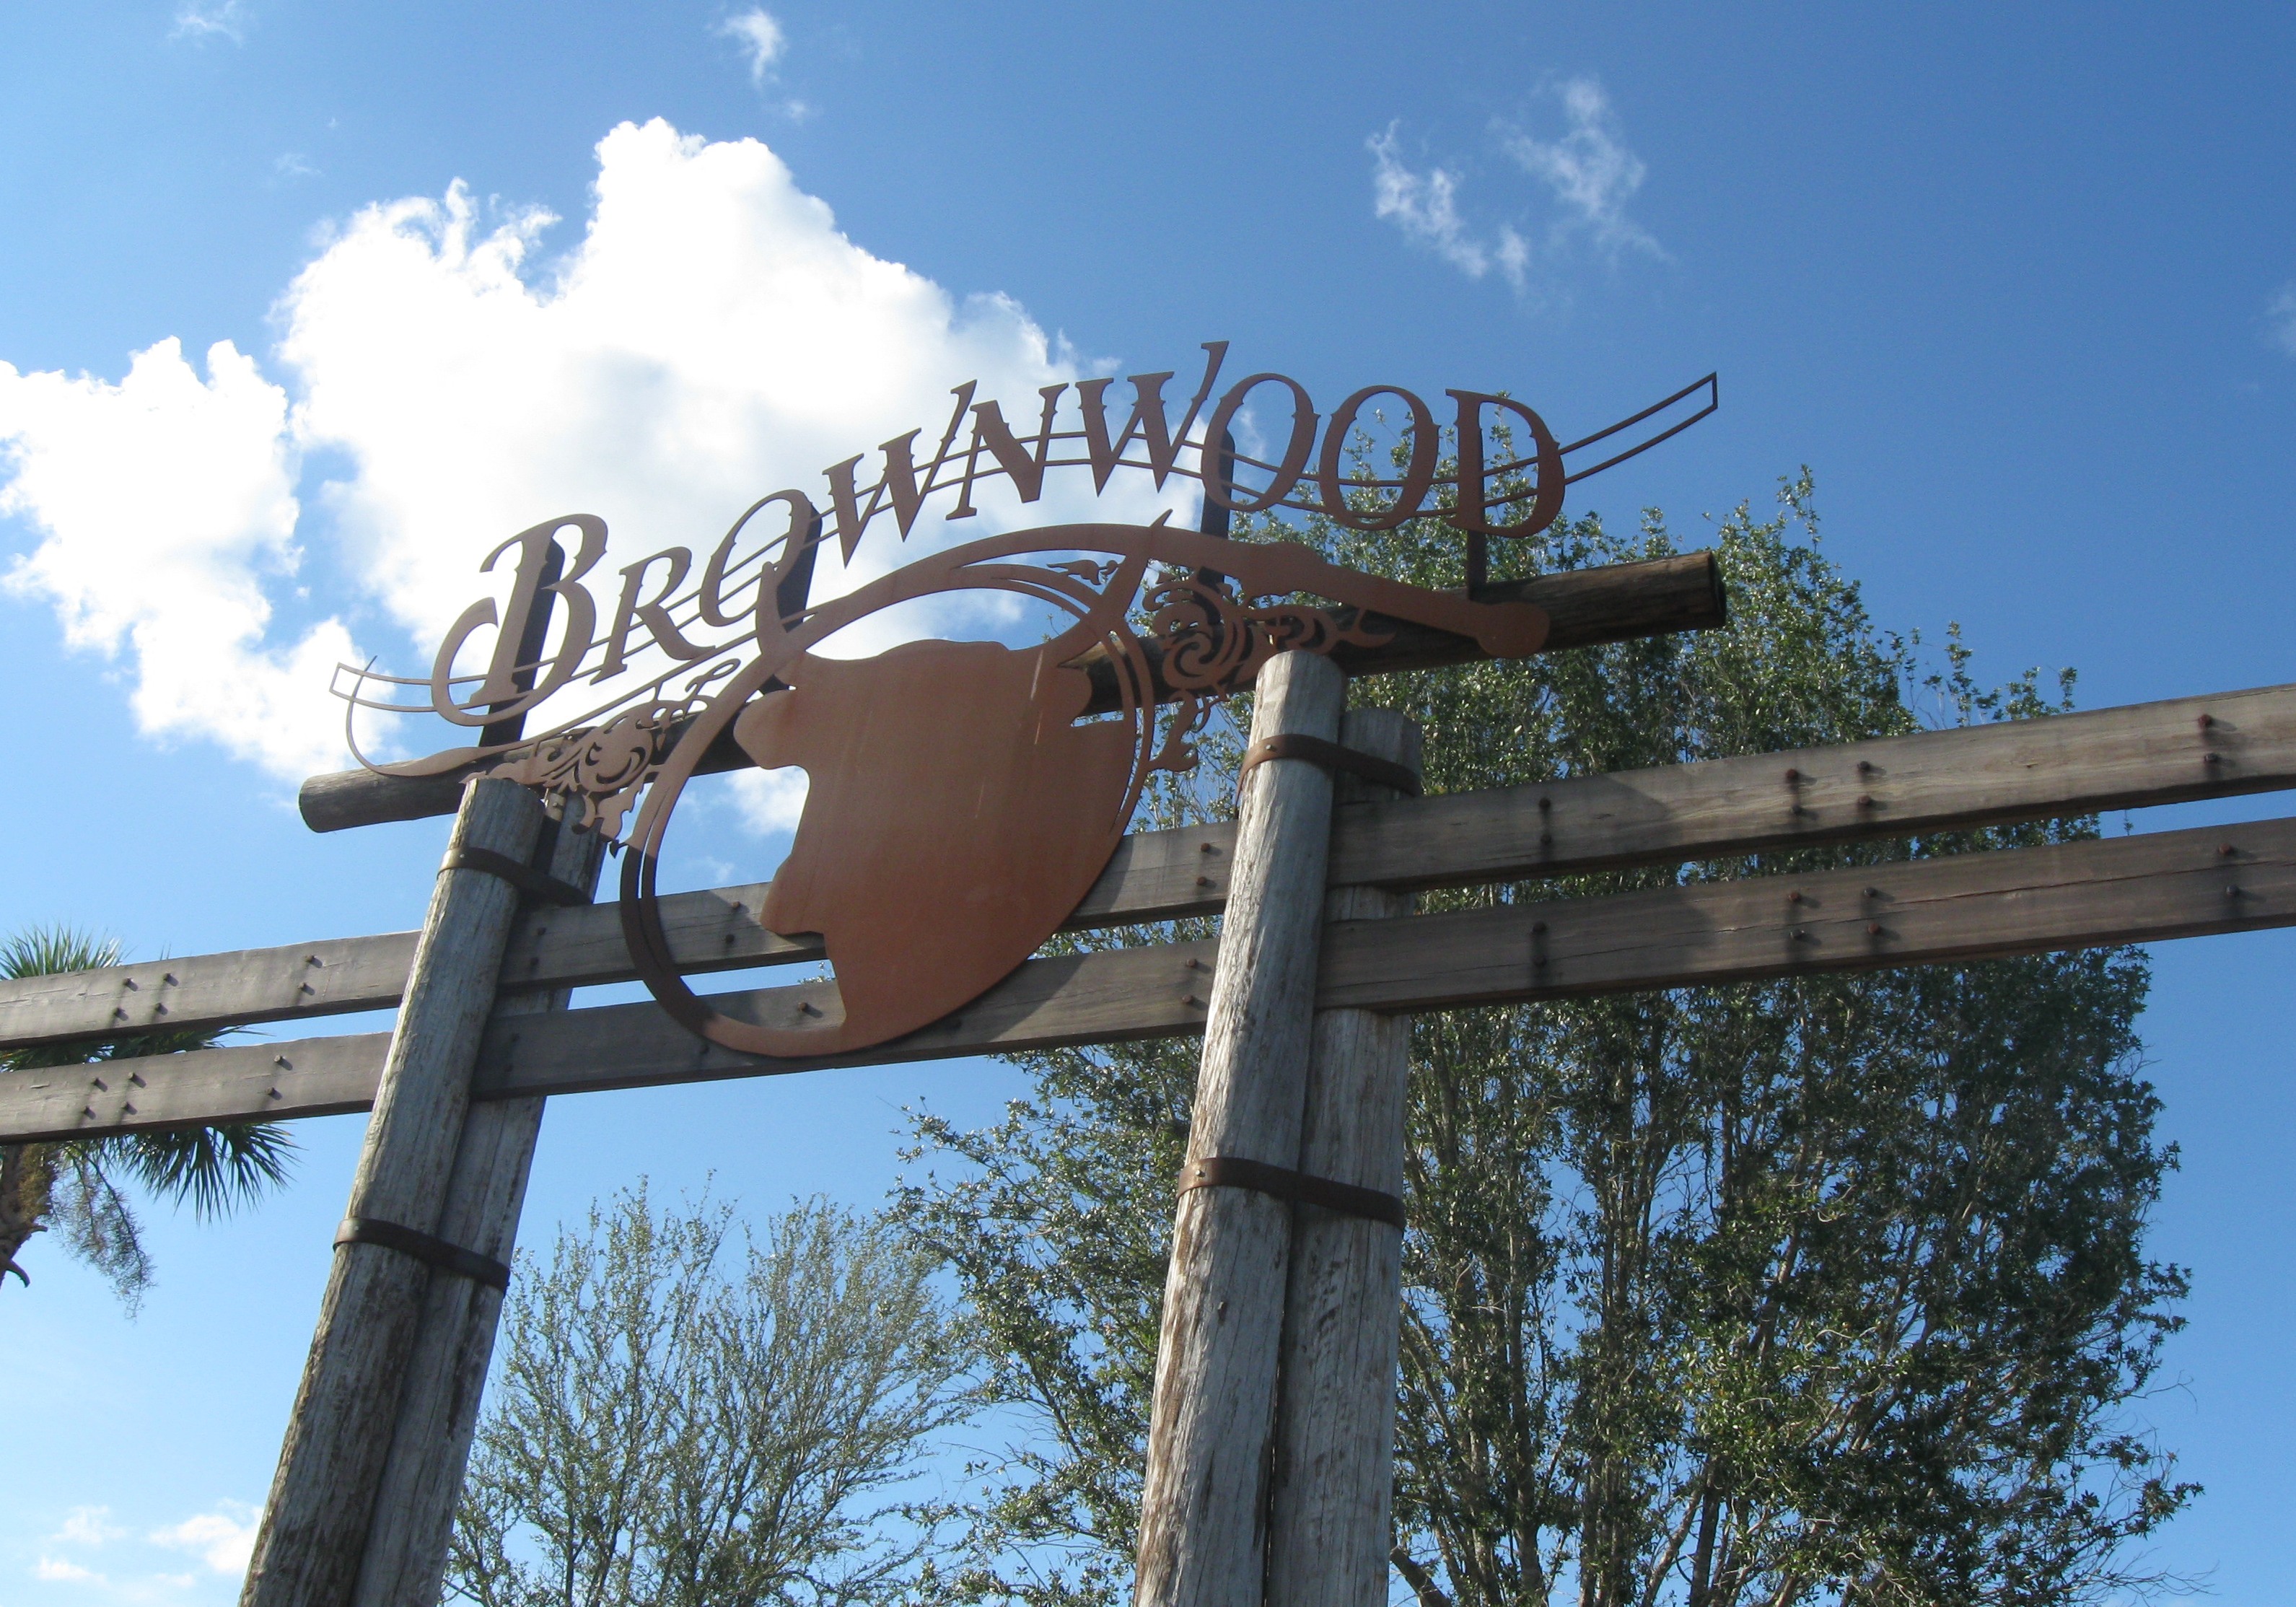 Intoxicated man arrested after thrown out of popular bar at Brownwood